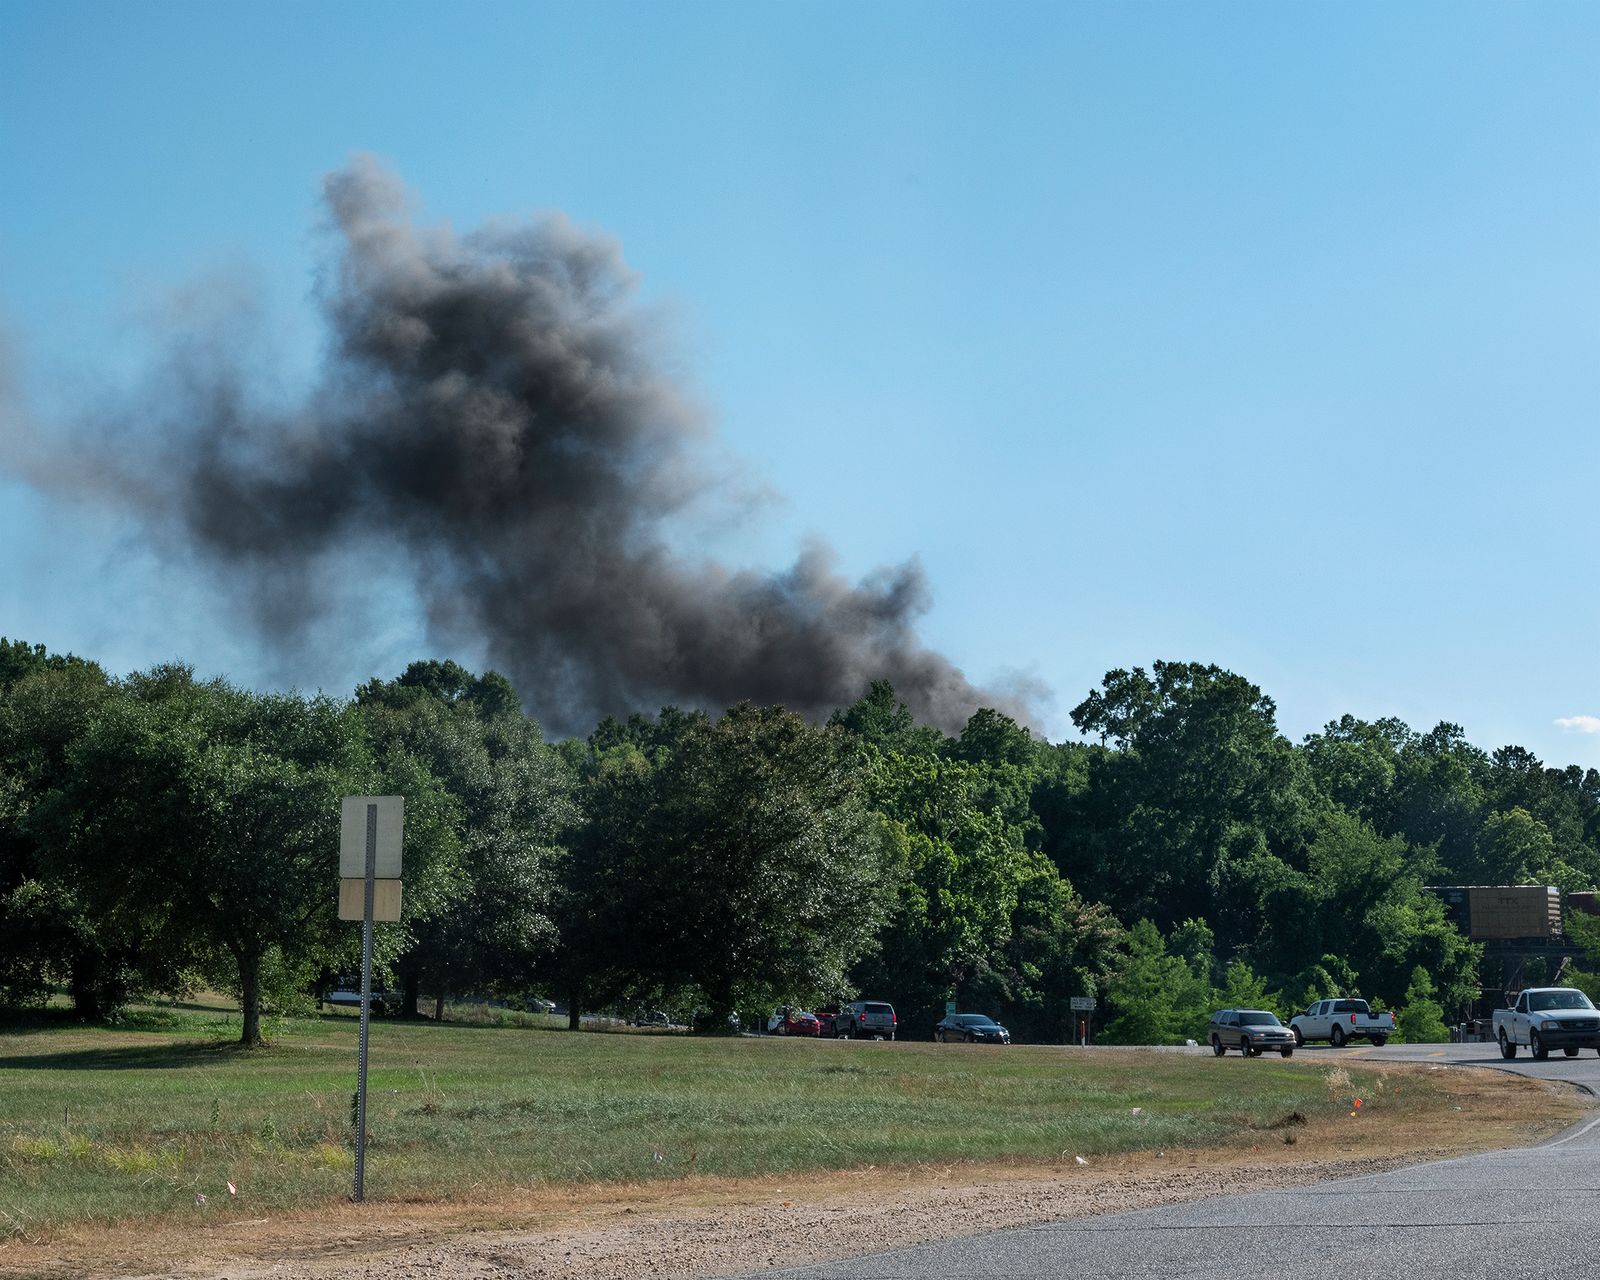 © Allison Grant - A Chemical Fire Burns, 800 Feet Downwind From My Children's School